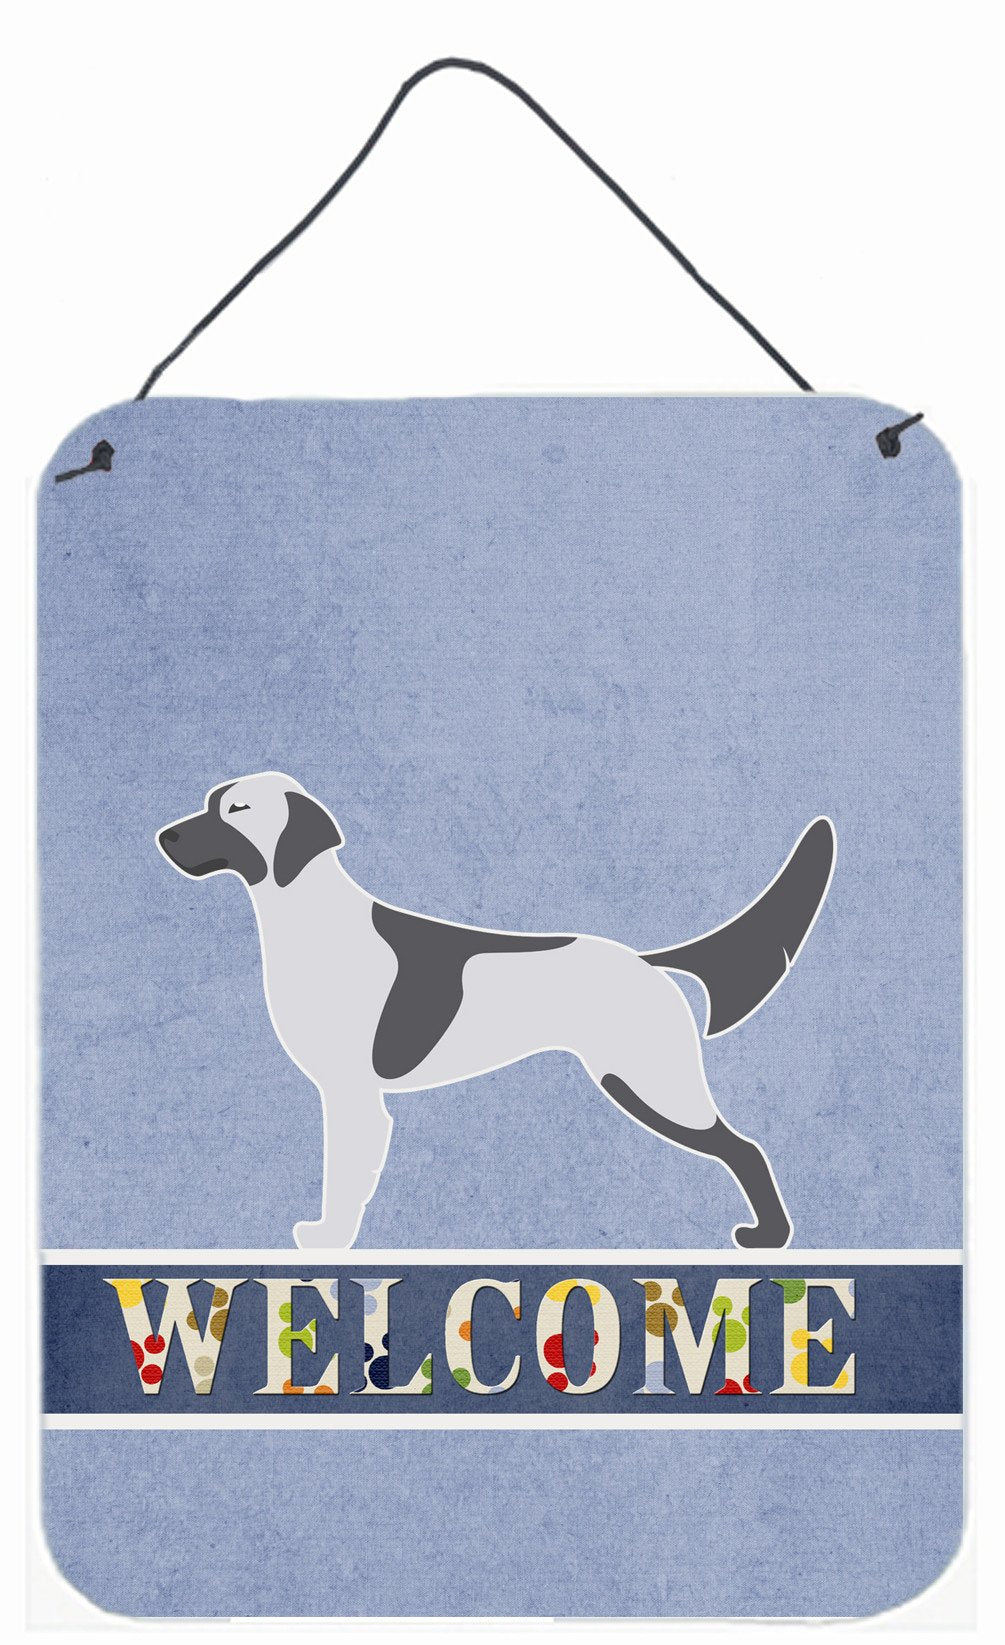 English+Setter+Welcome+Wall+or+Door+Hanging+Prints+BB5485DS1216+by+Caroline's+Treasures